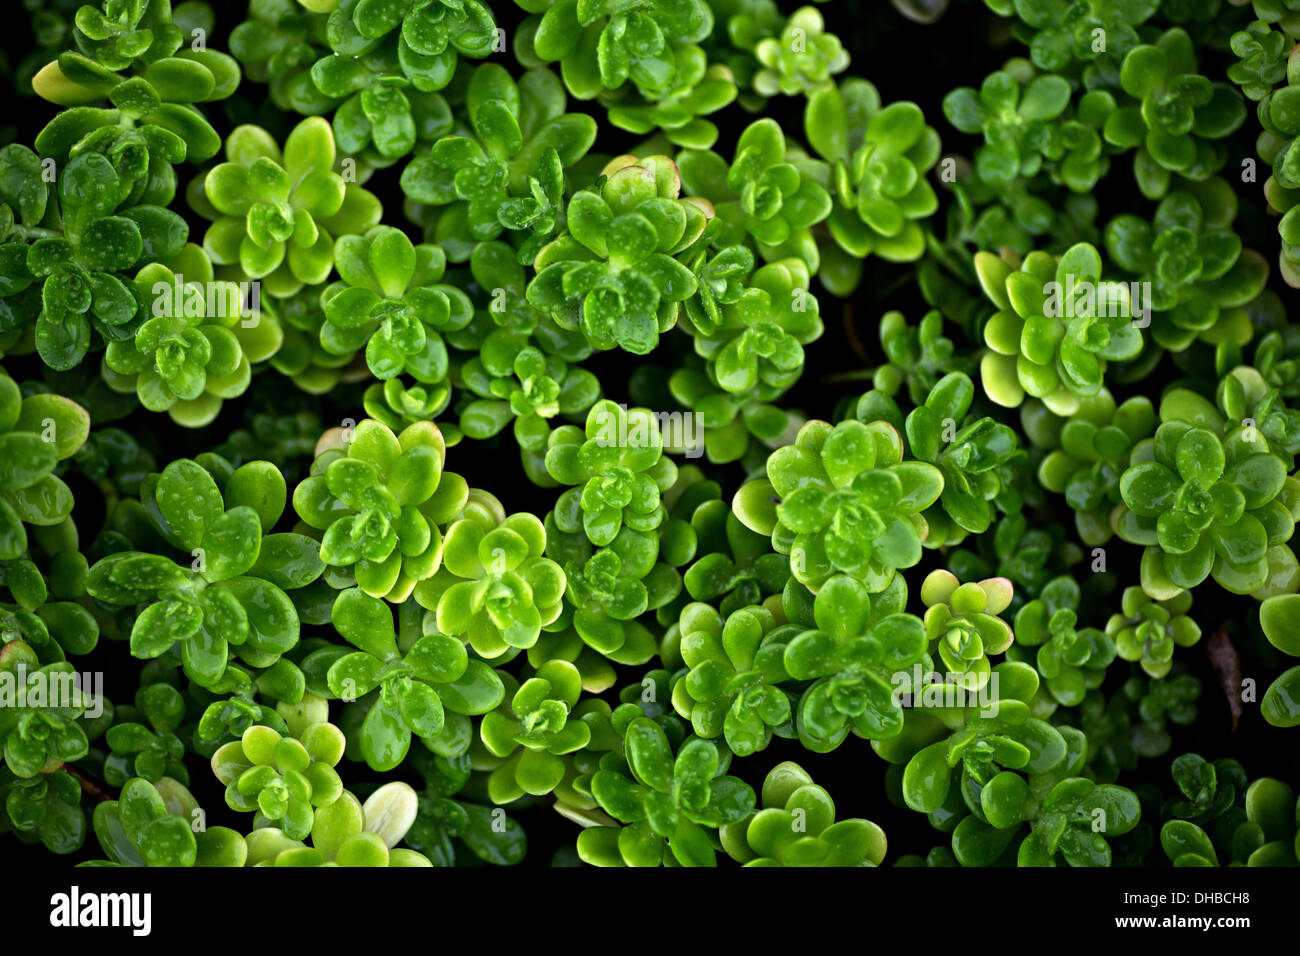 diversely green plants as background surface Stock Photo